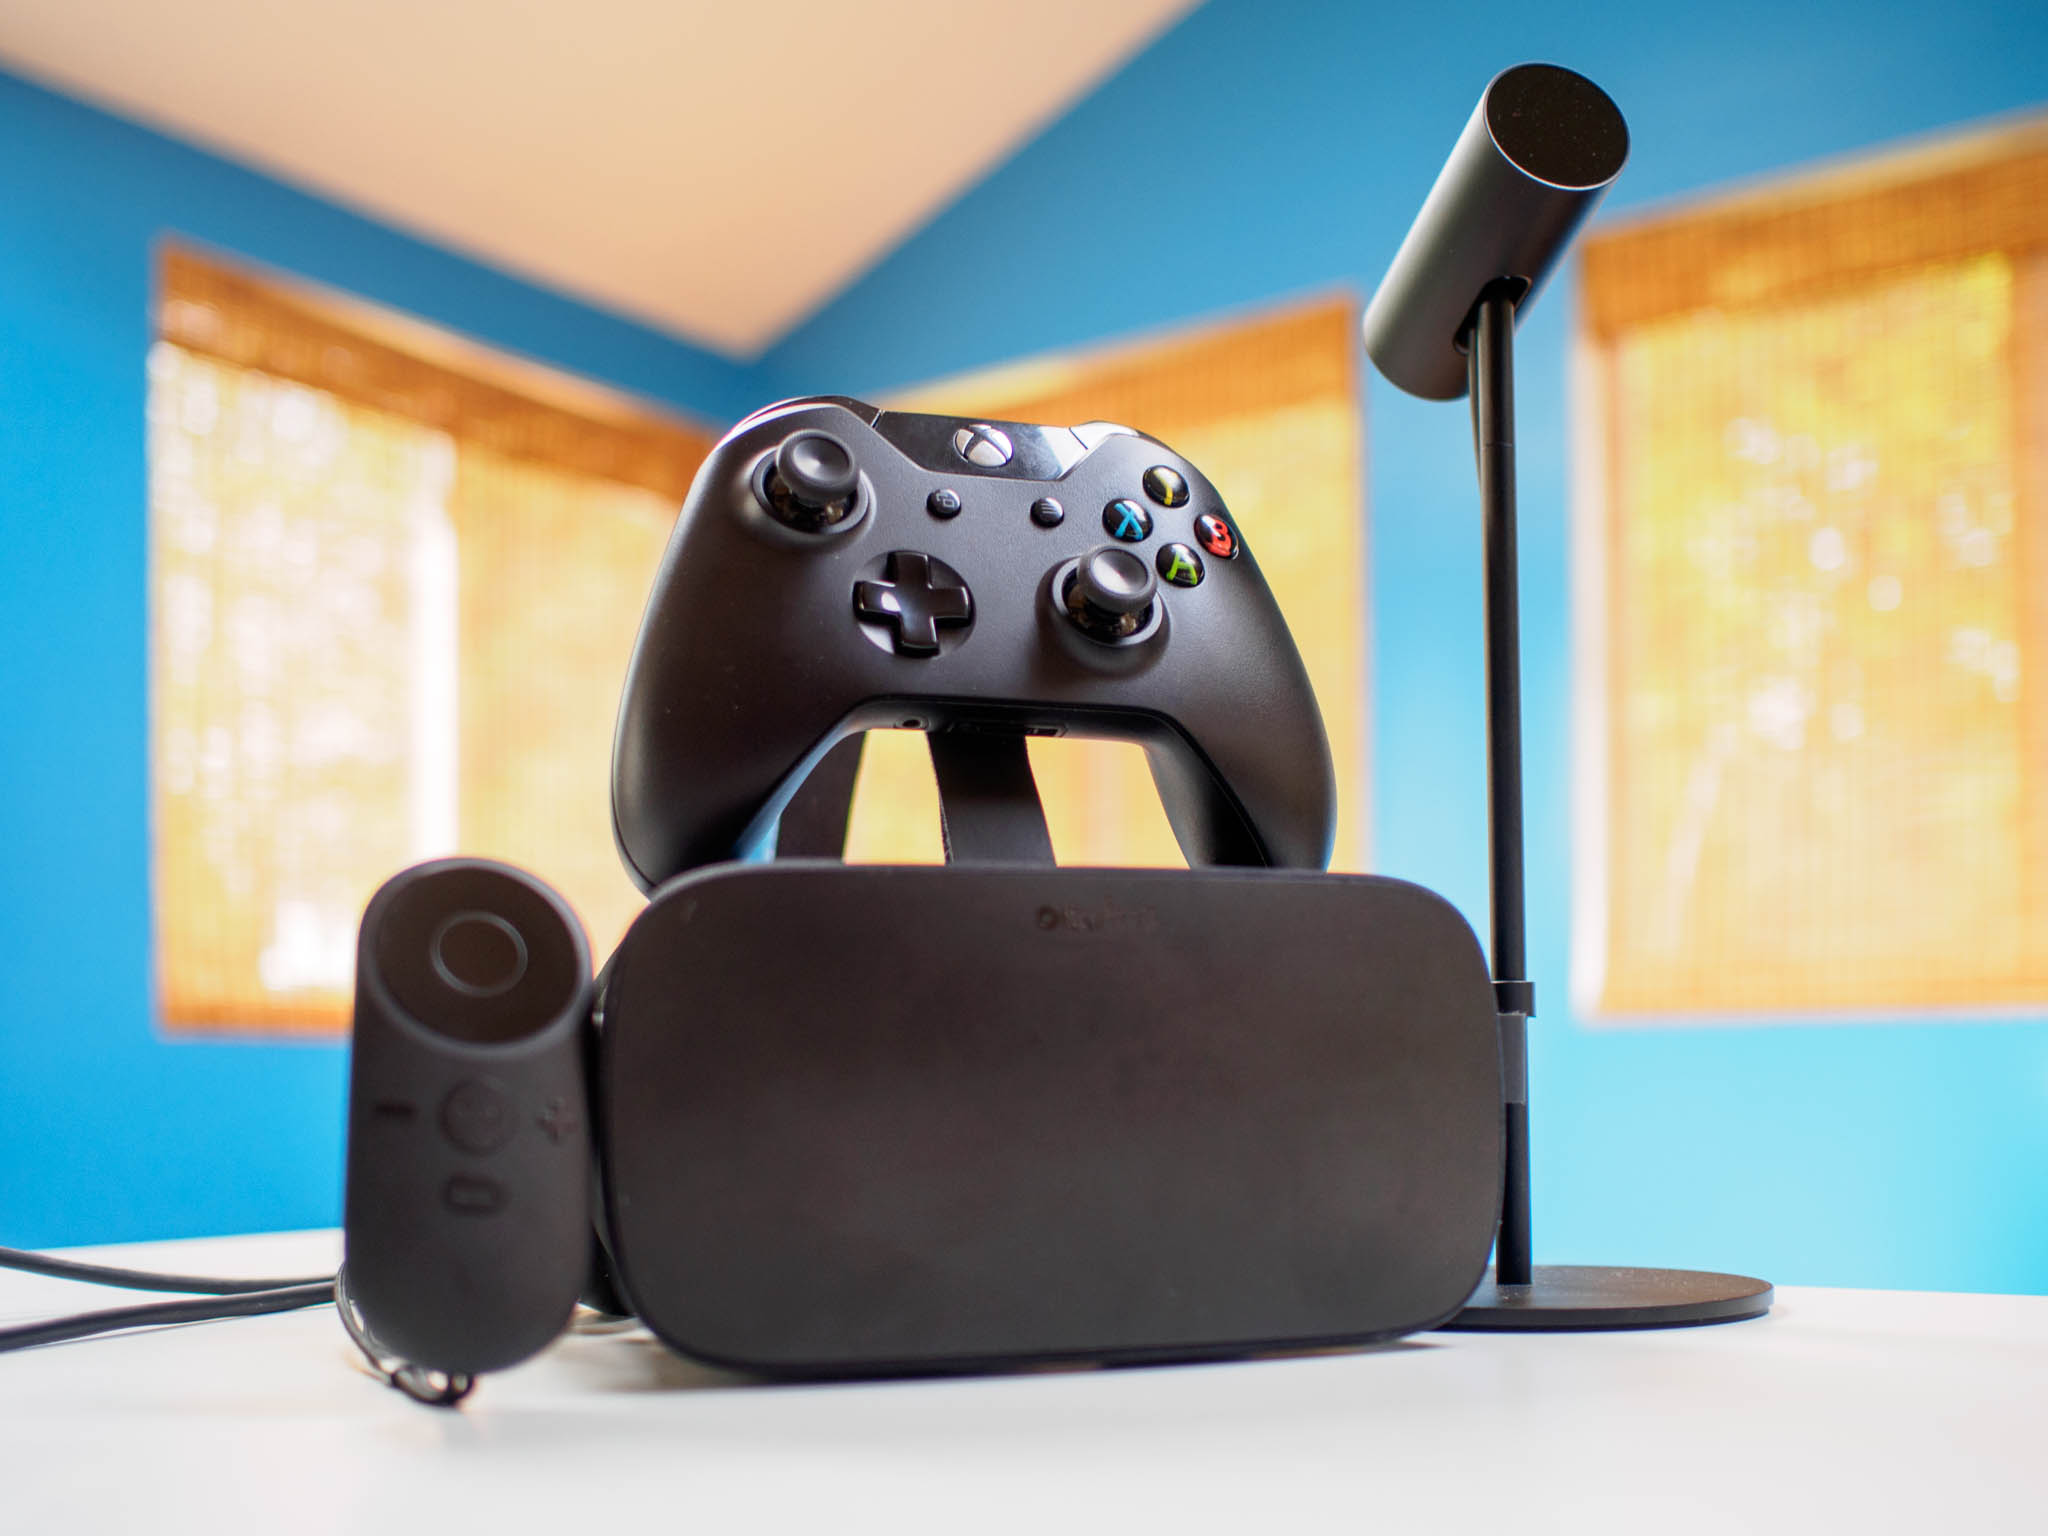 after-purchasing-oculus-rift-what-else-is-needed-to-use